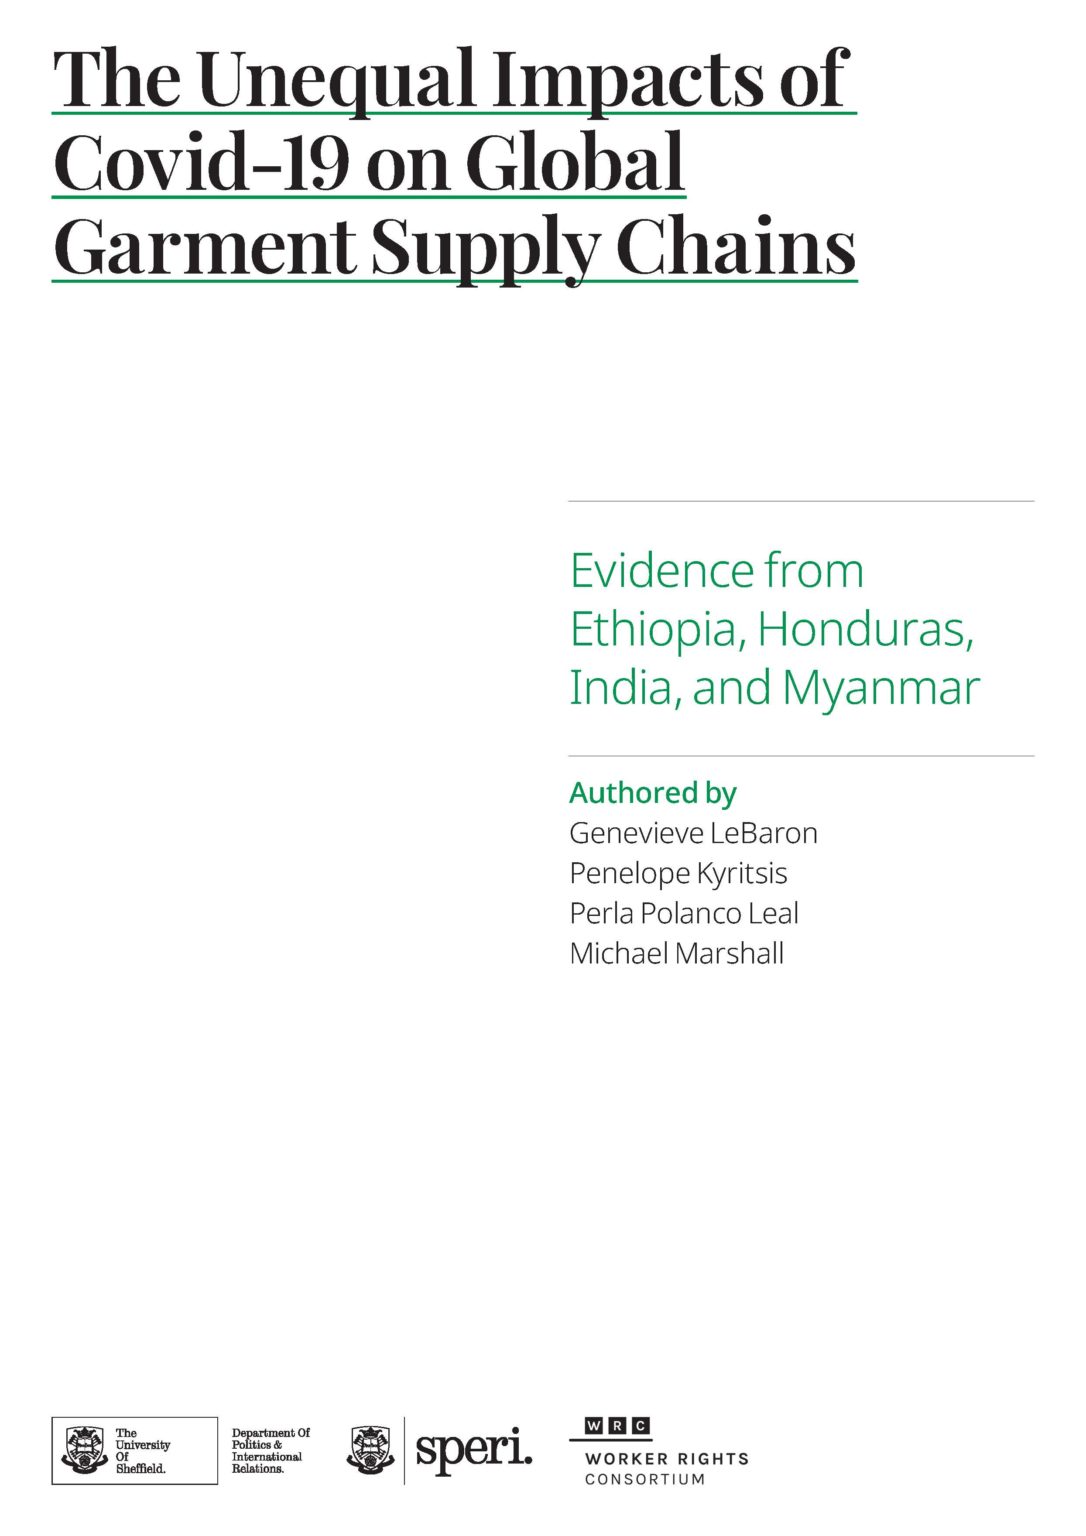 The Unequal Impacts of Covid-19 on Global Garment Supply Chains ...